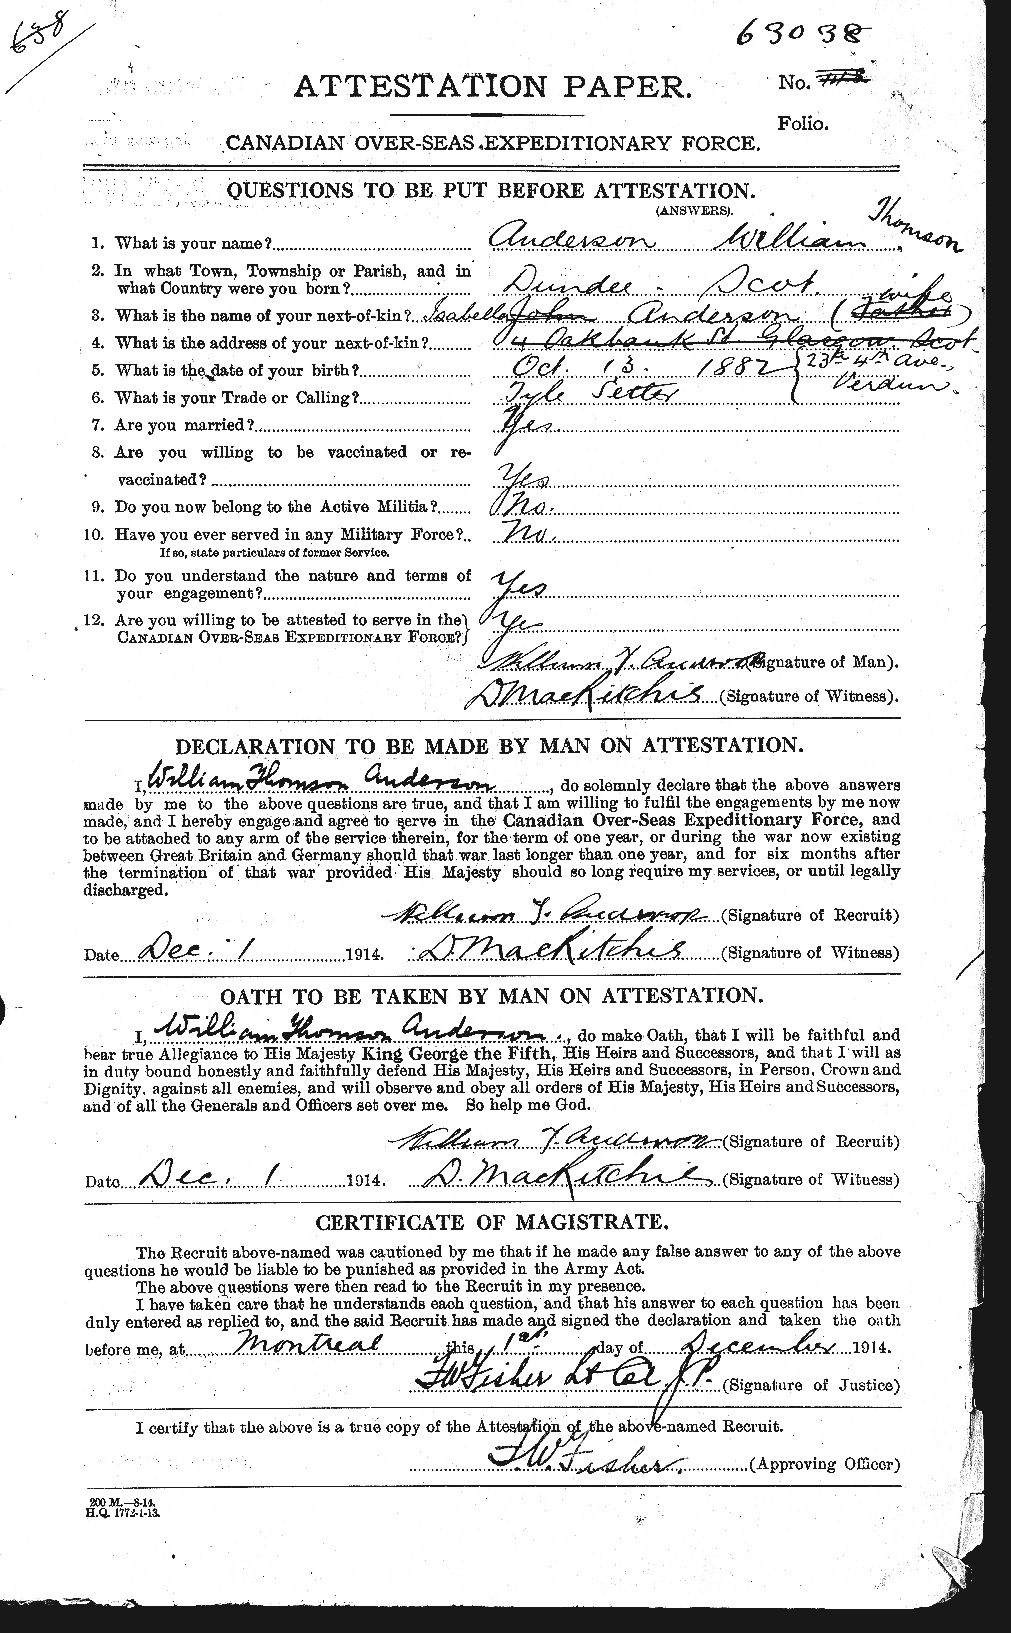 Personnel Records of the First World War - CEF 210849a